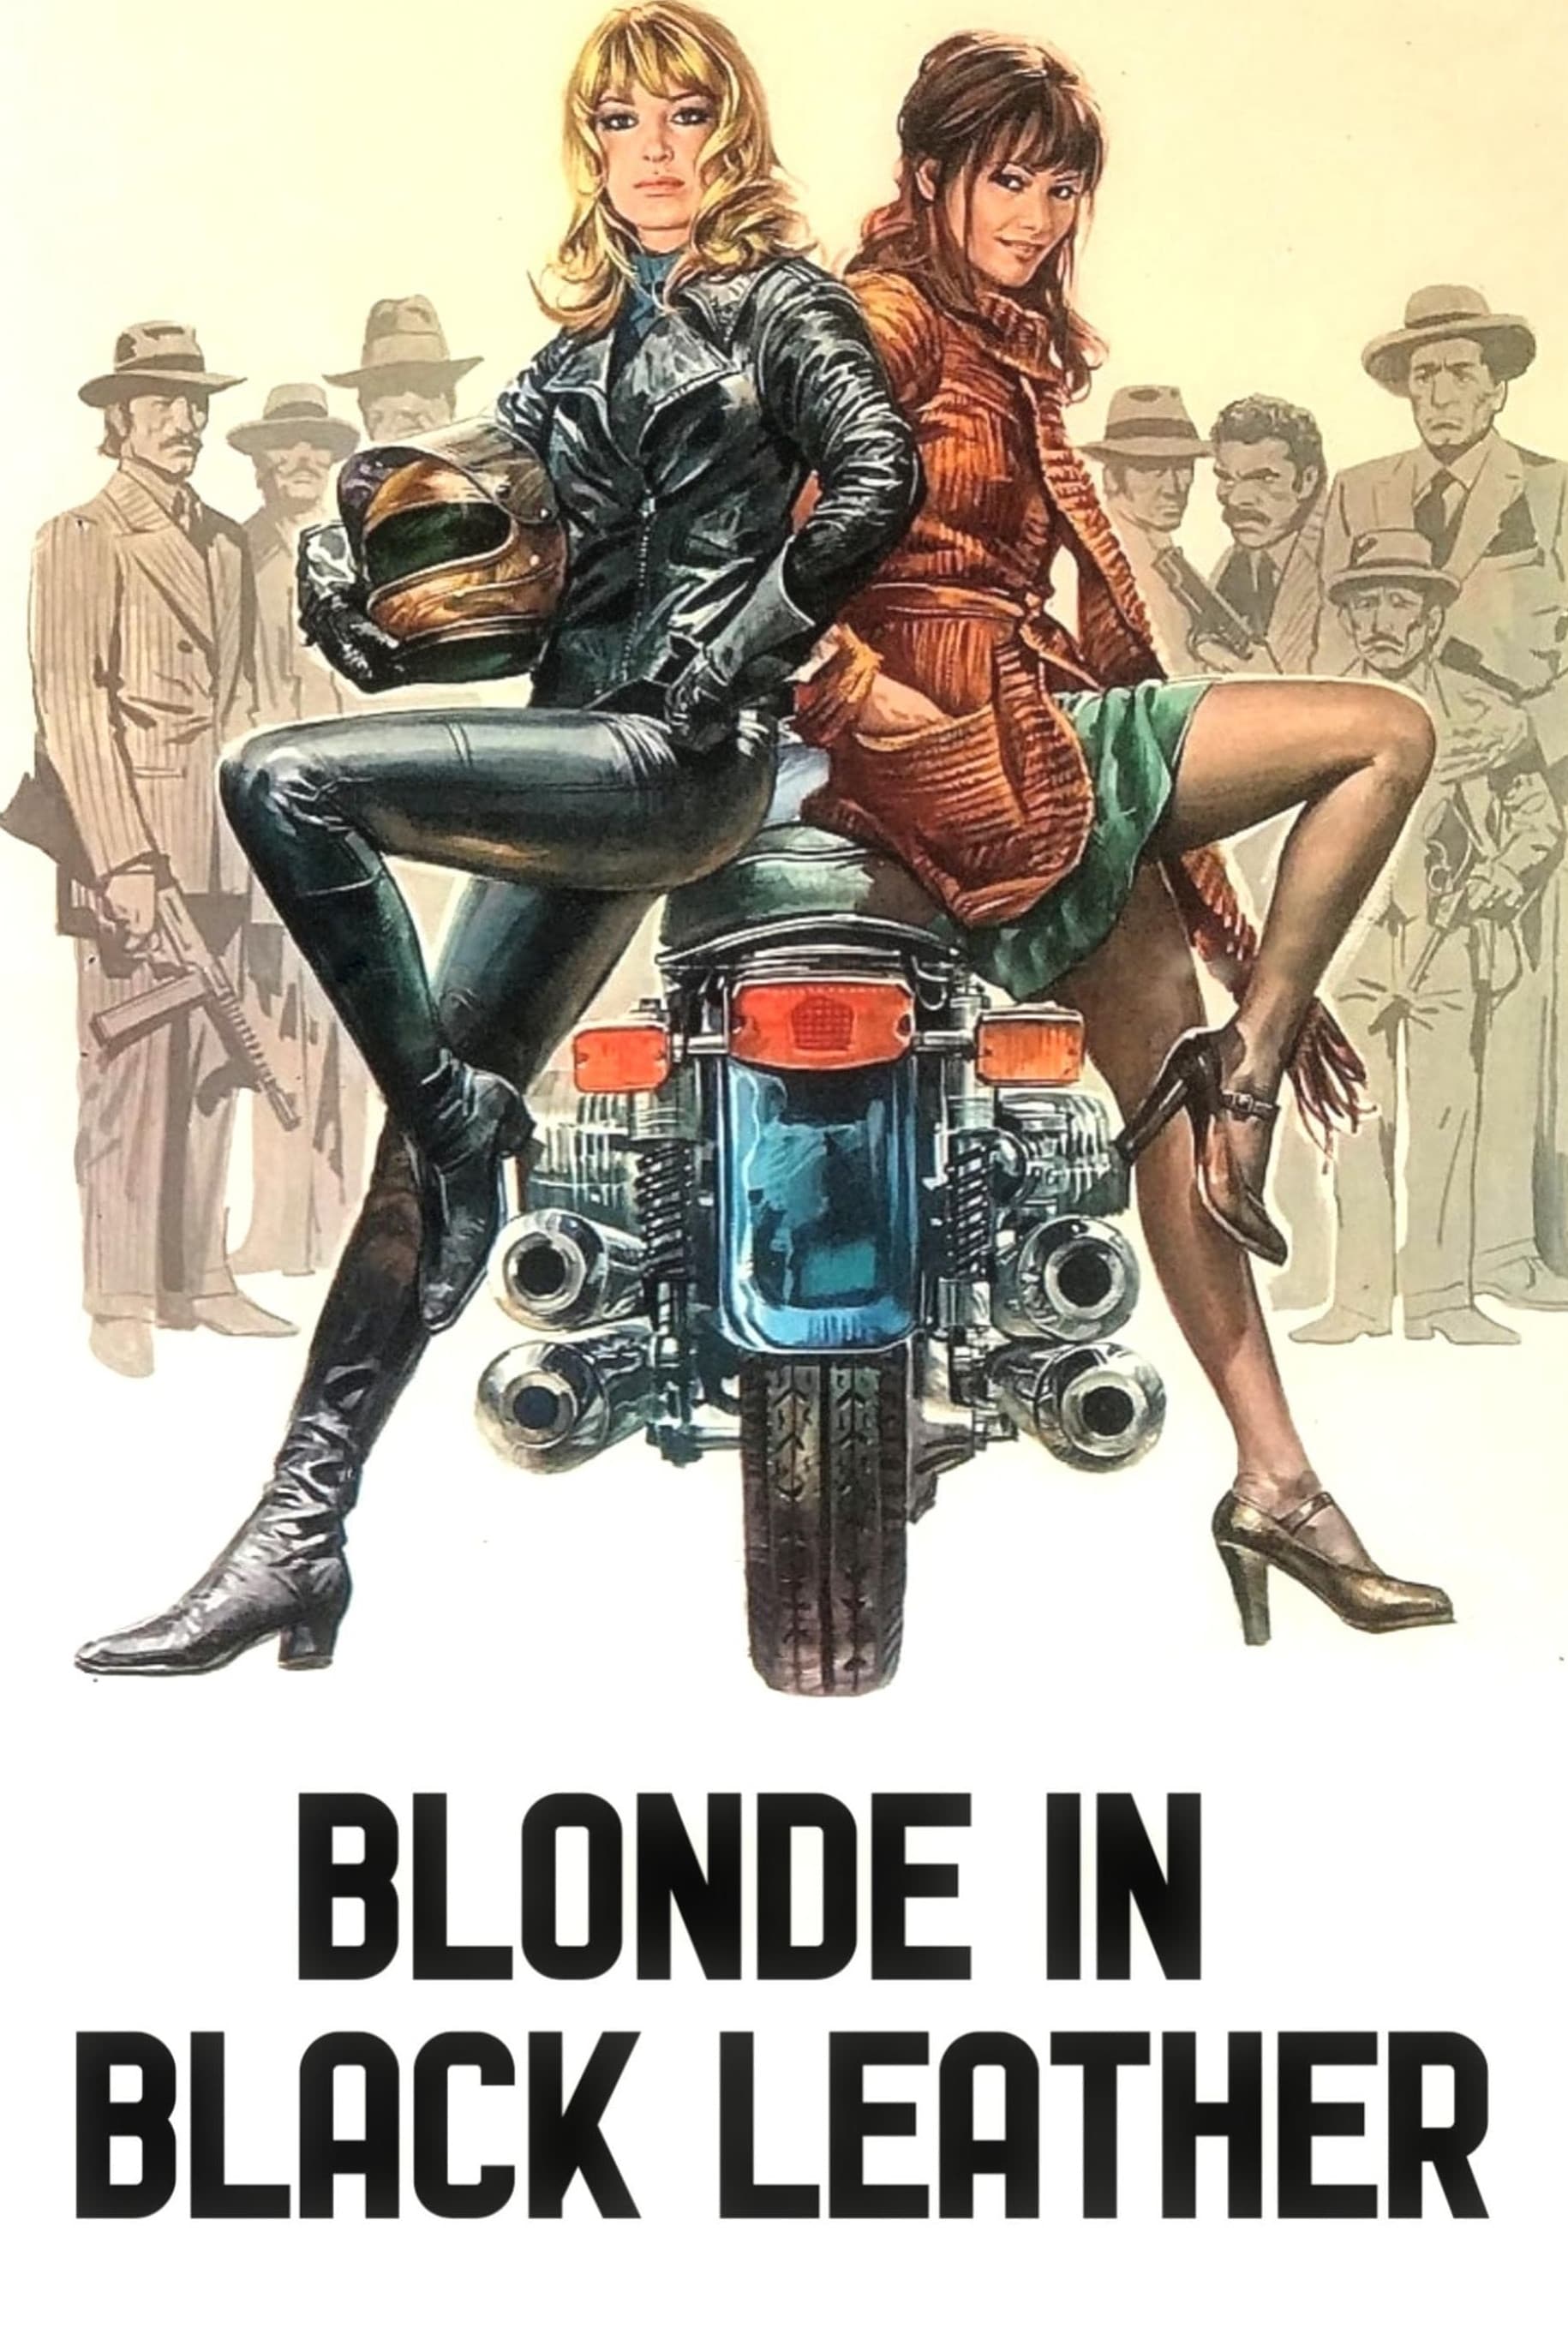 Blonde in Black Leather (1975)